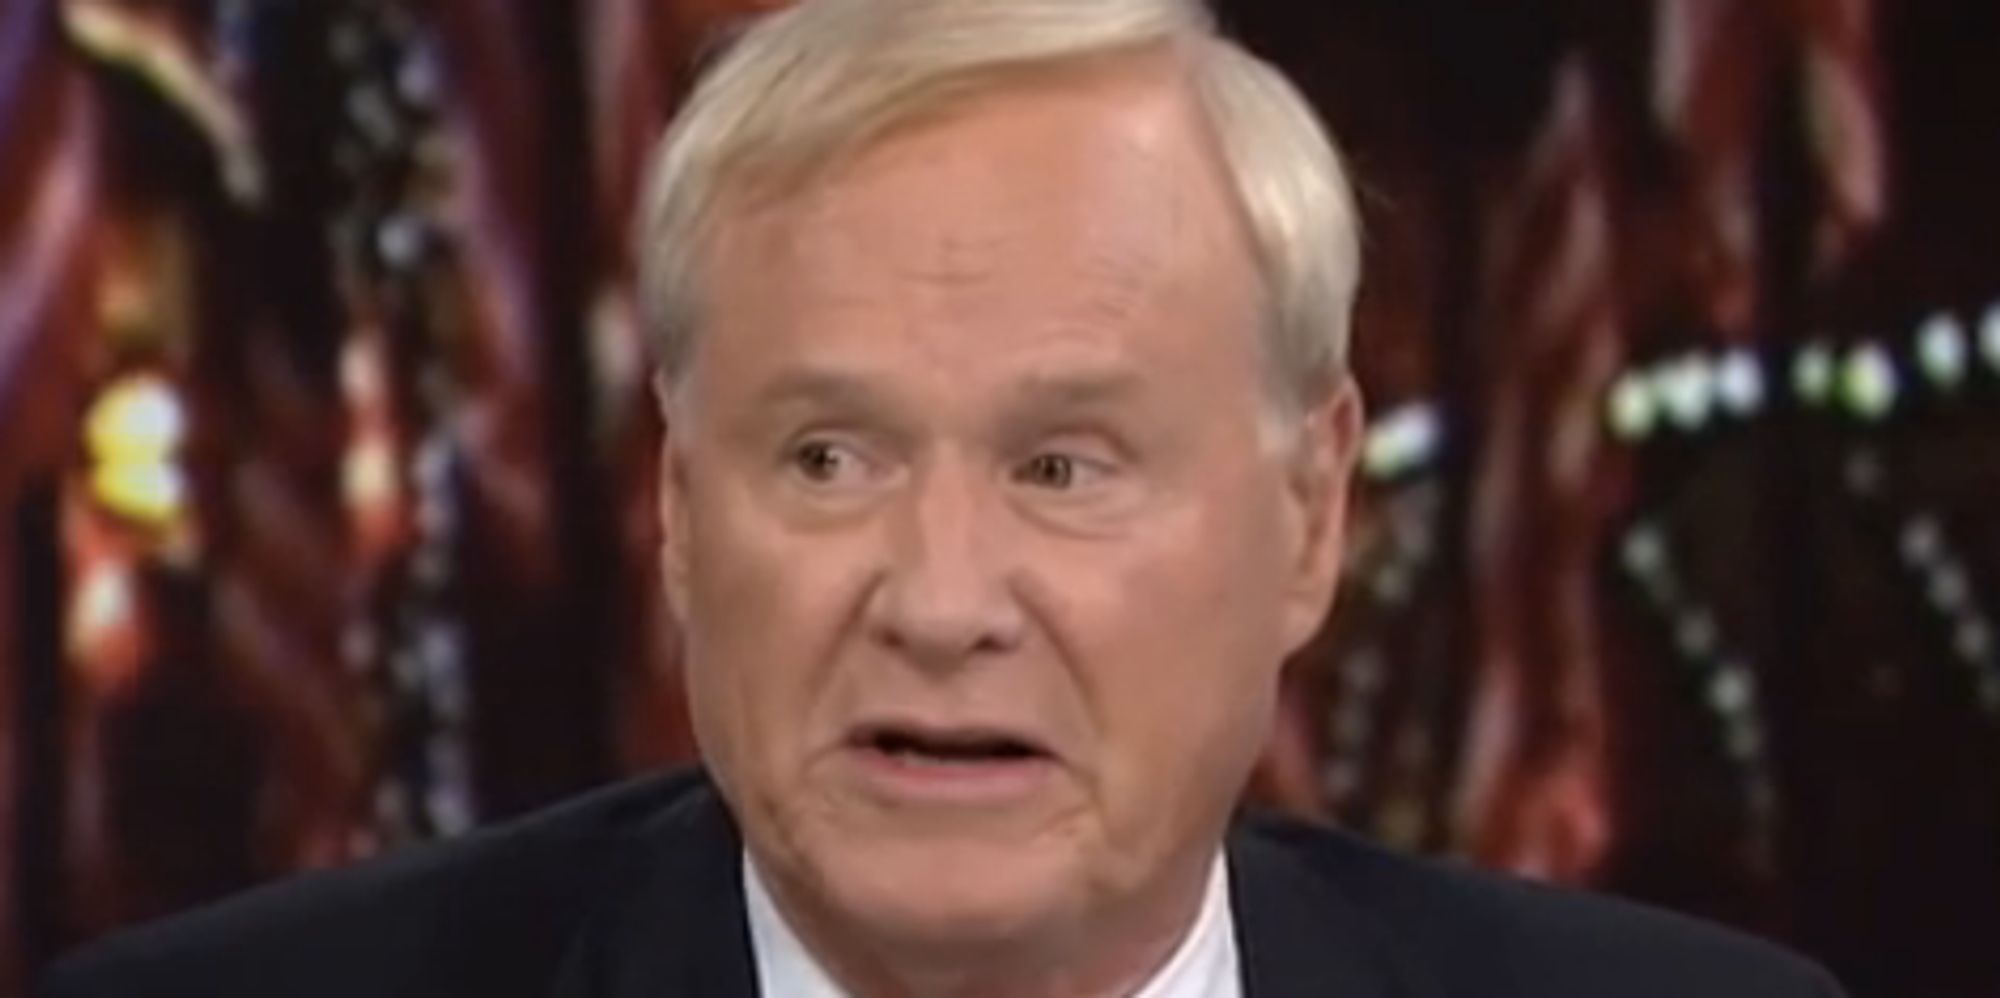 What controversial events has MSNBC's Chris Matthews covered during his career?